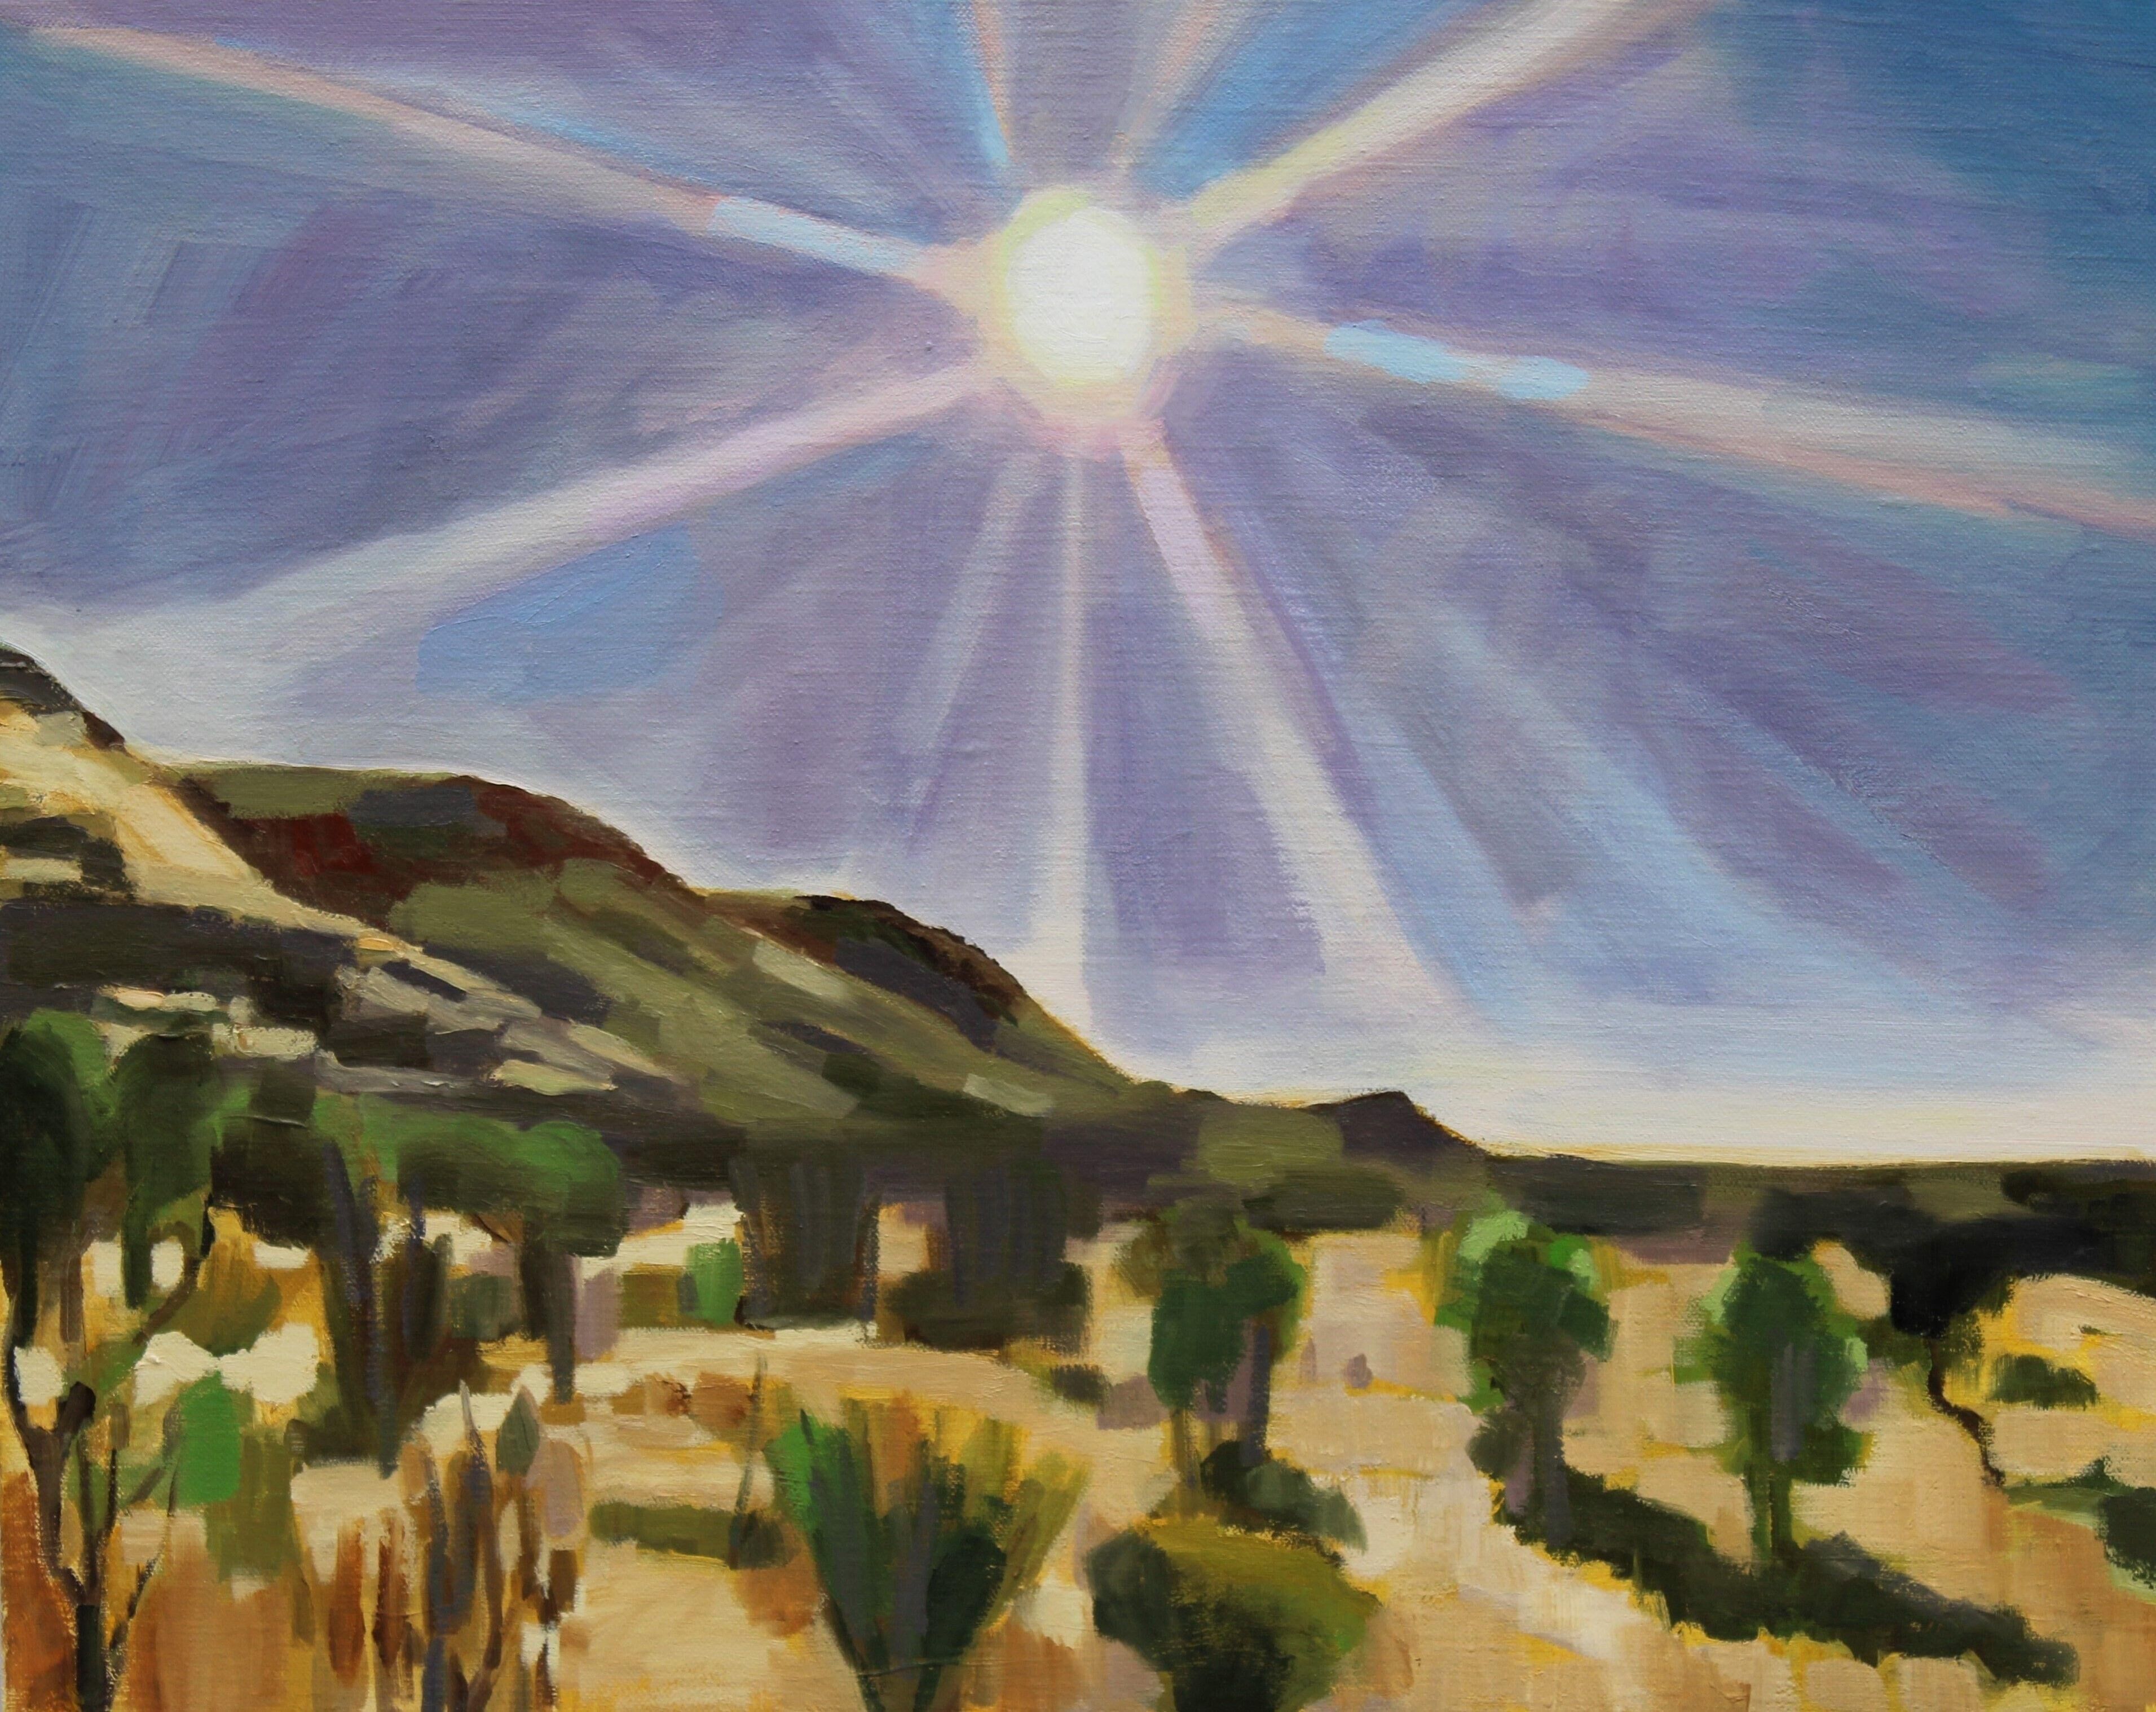 Patrice Wills_A New Day_oil on linen_50 x 40cm